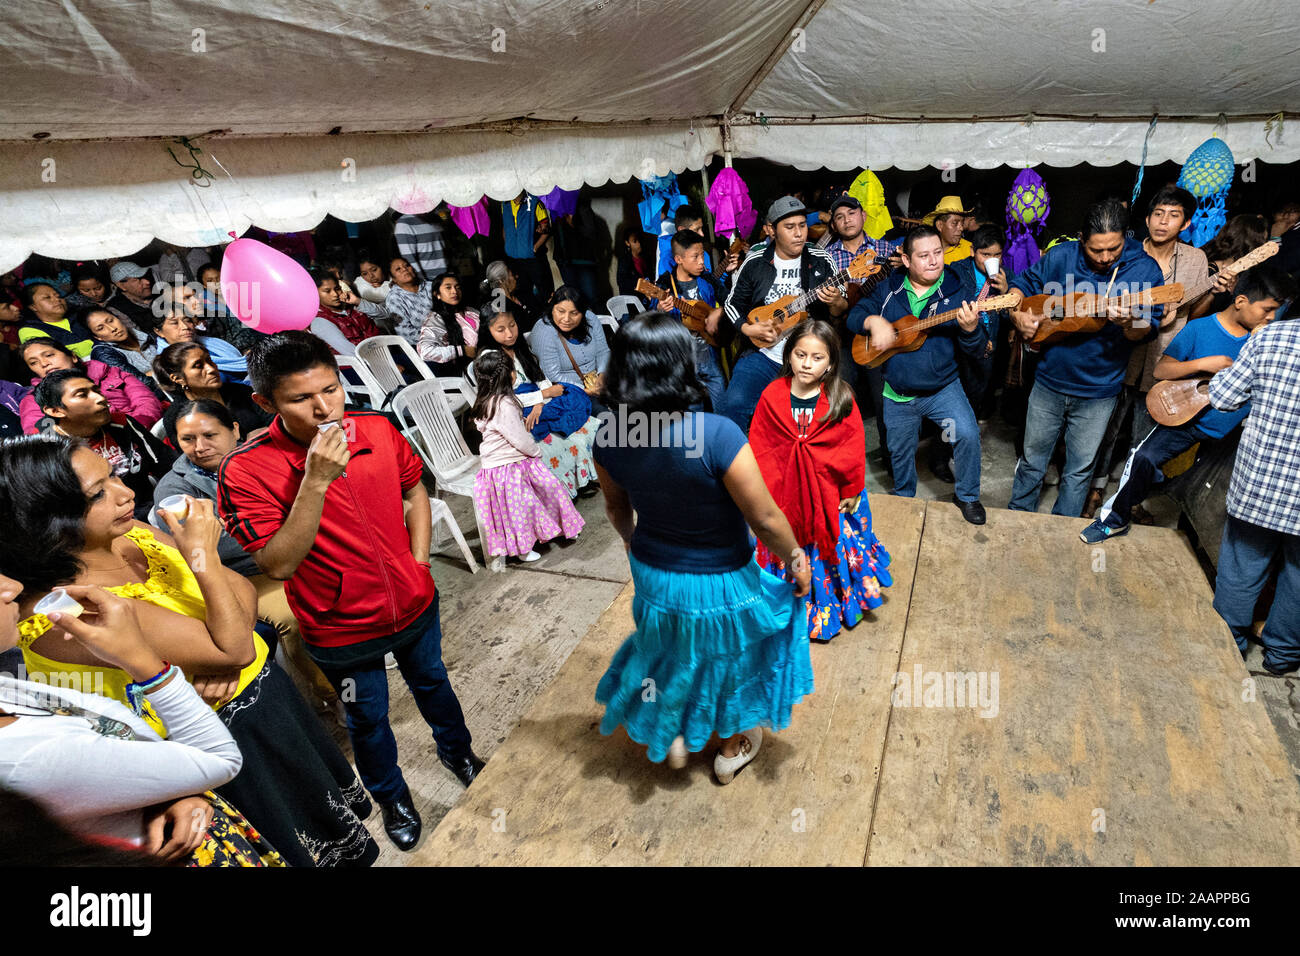 Zapateado dancers perform a traditional folk dance during a neighborhood Huapango in Santiago Tuxtla, Veracruz, Mexico. The dance involves dancers striking their shoes on a wooden platform while a large group of musicians play string instruments. The gatherings take part in the Los Tuxtlas mountain villages for single people to meet. Stock Photo